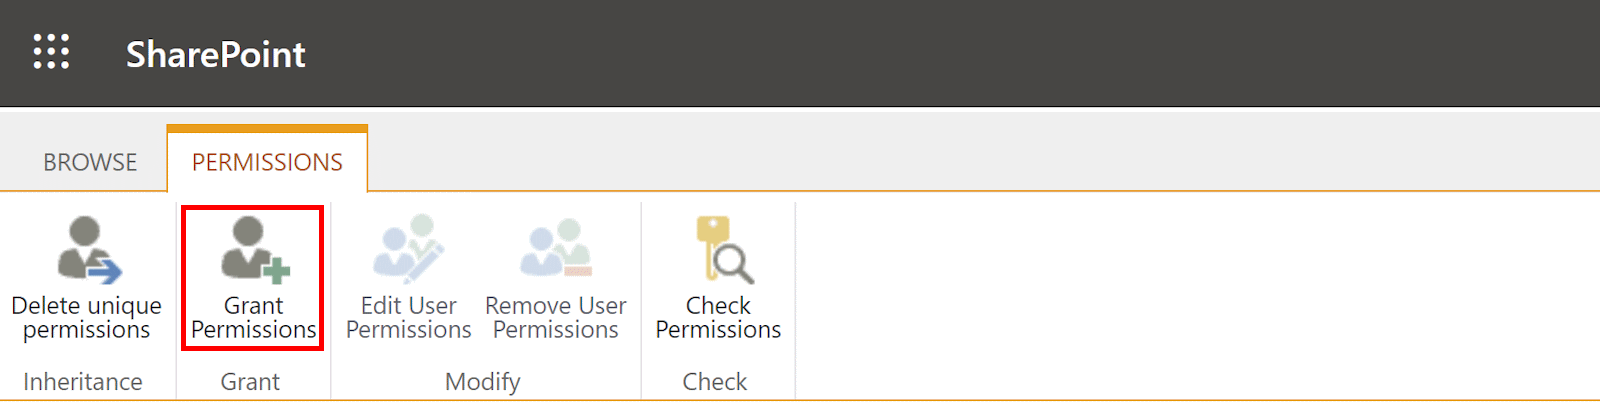 Grant Permissions toolbar button in SharePoint